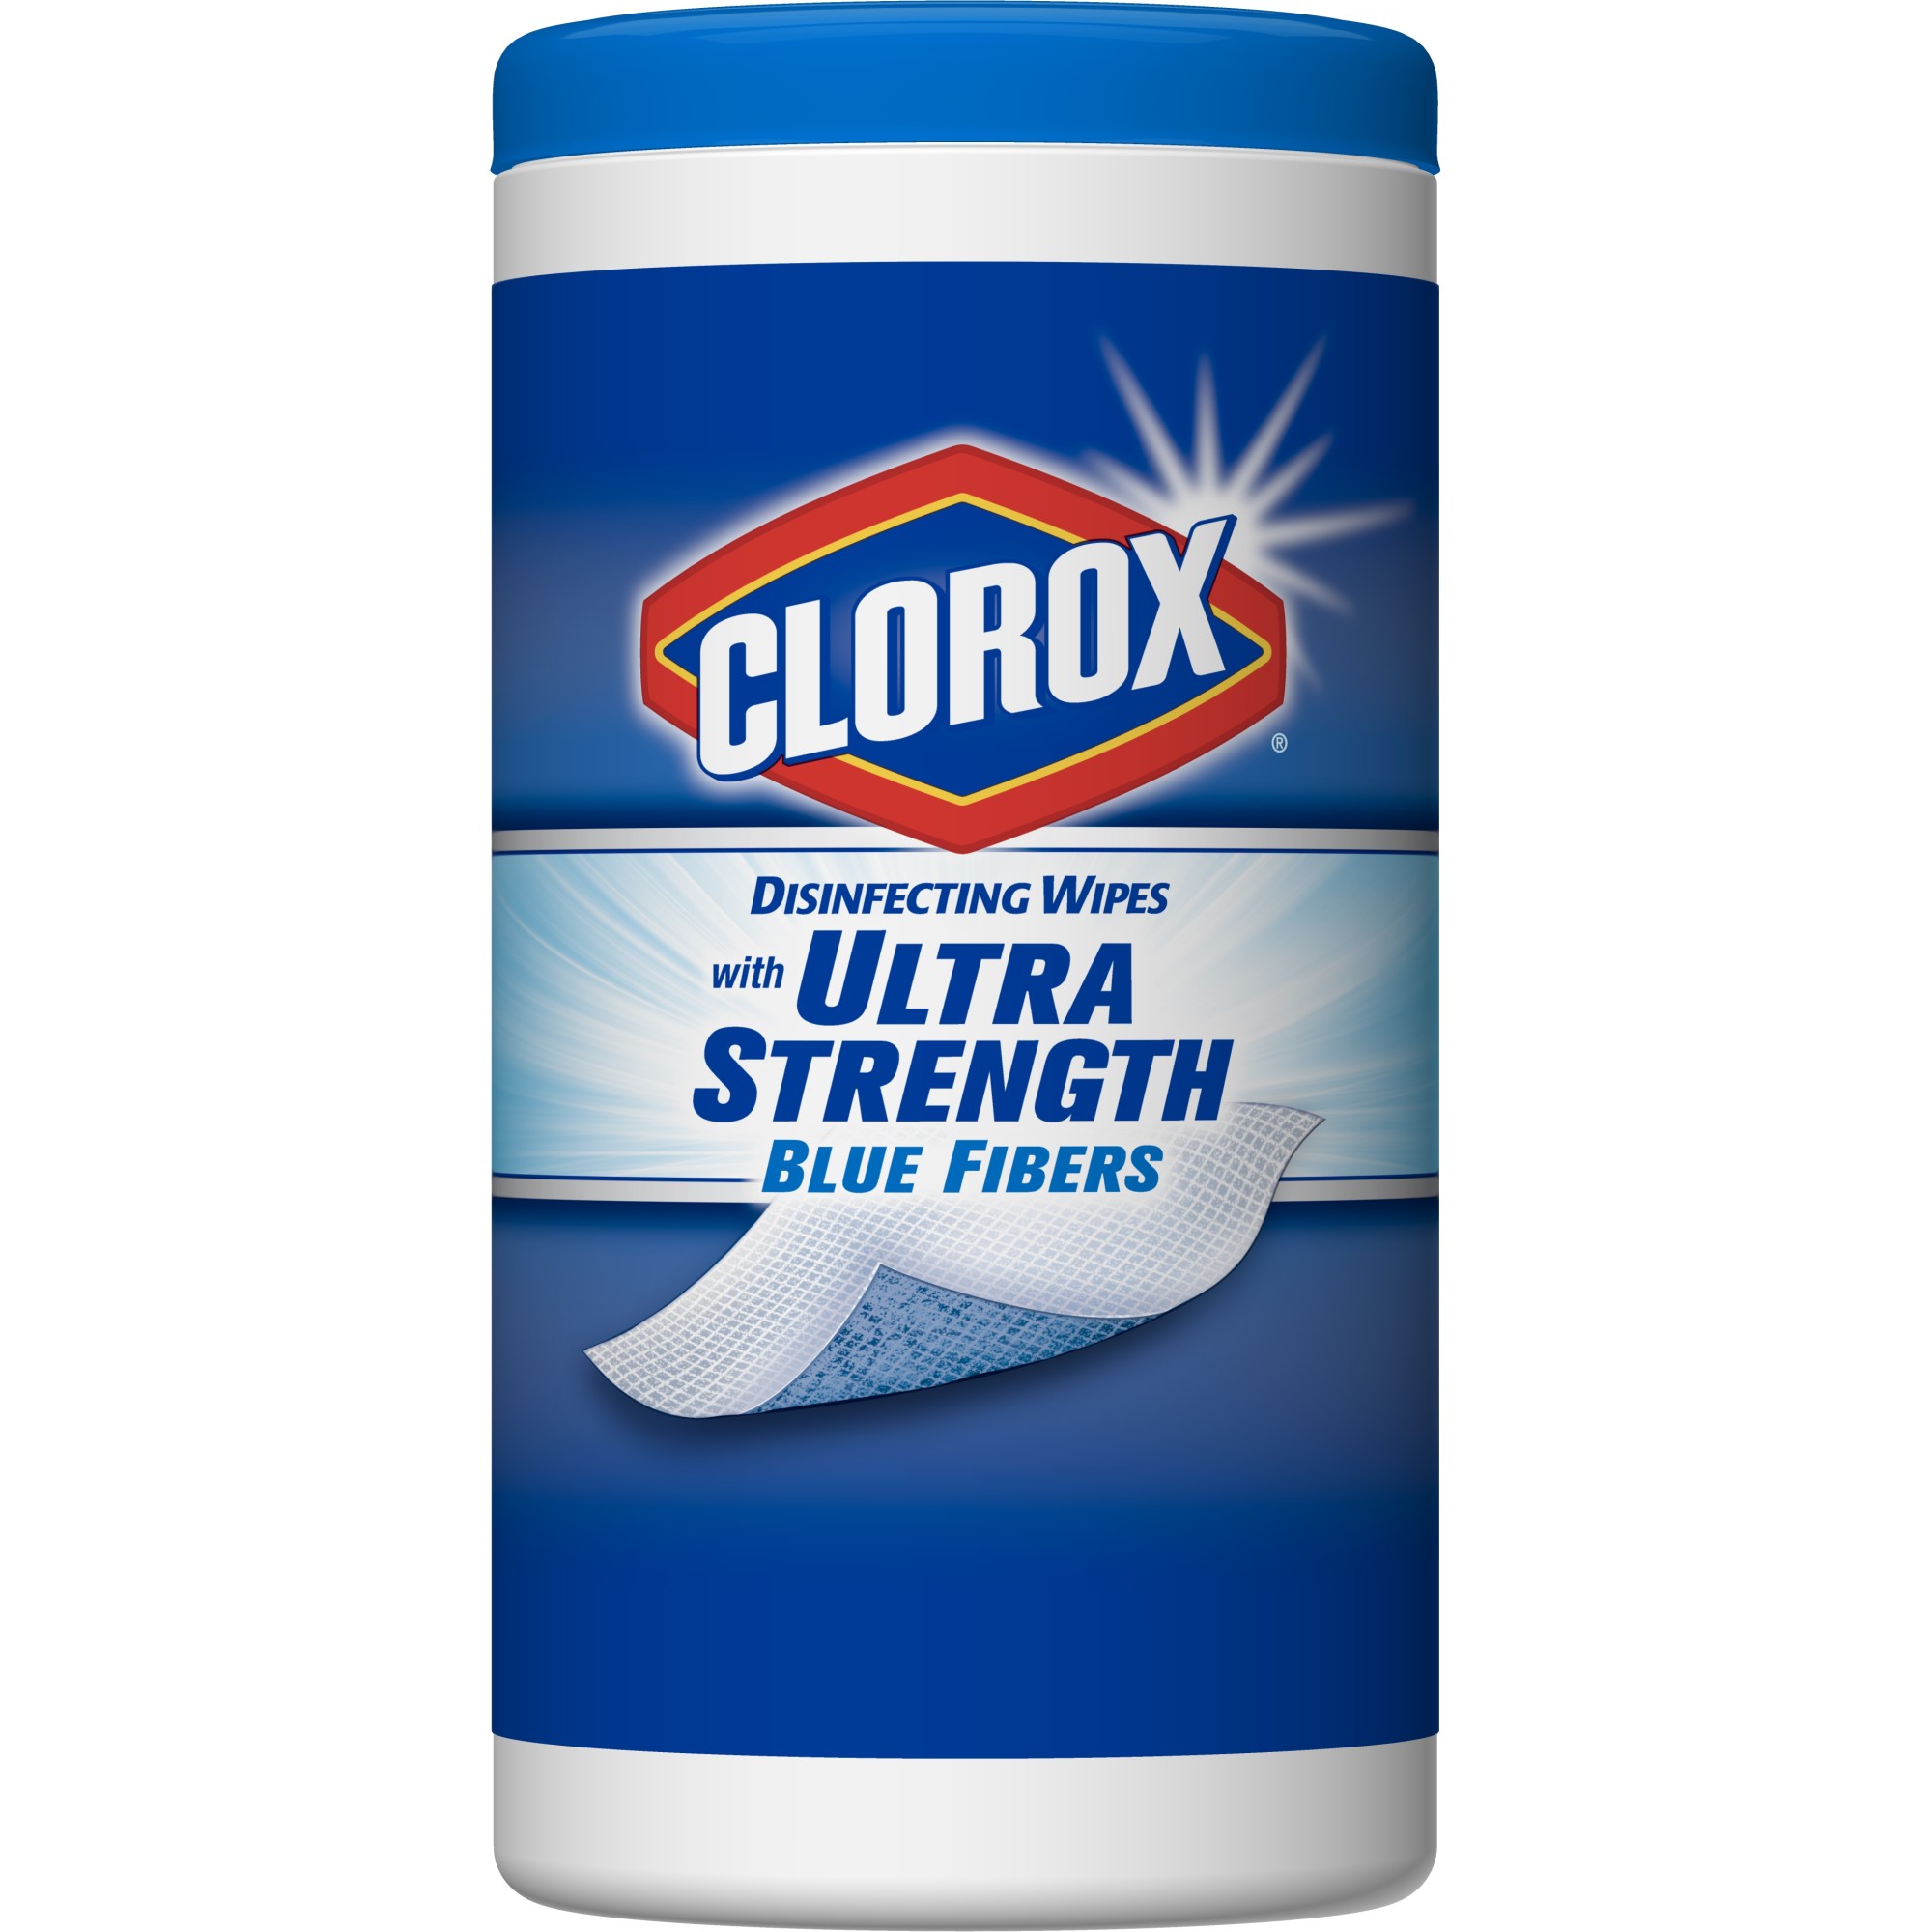 Clorox Disinfecting Wipes with Ultra Strength Blue Fibers, Crisp Lemon - 1 Canister - 65 Wipes - image 6 of 7